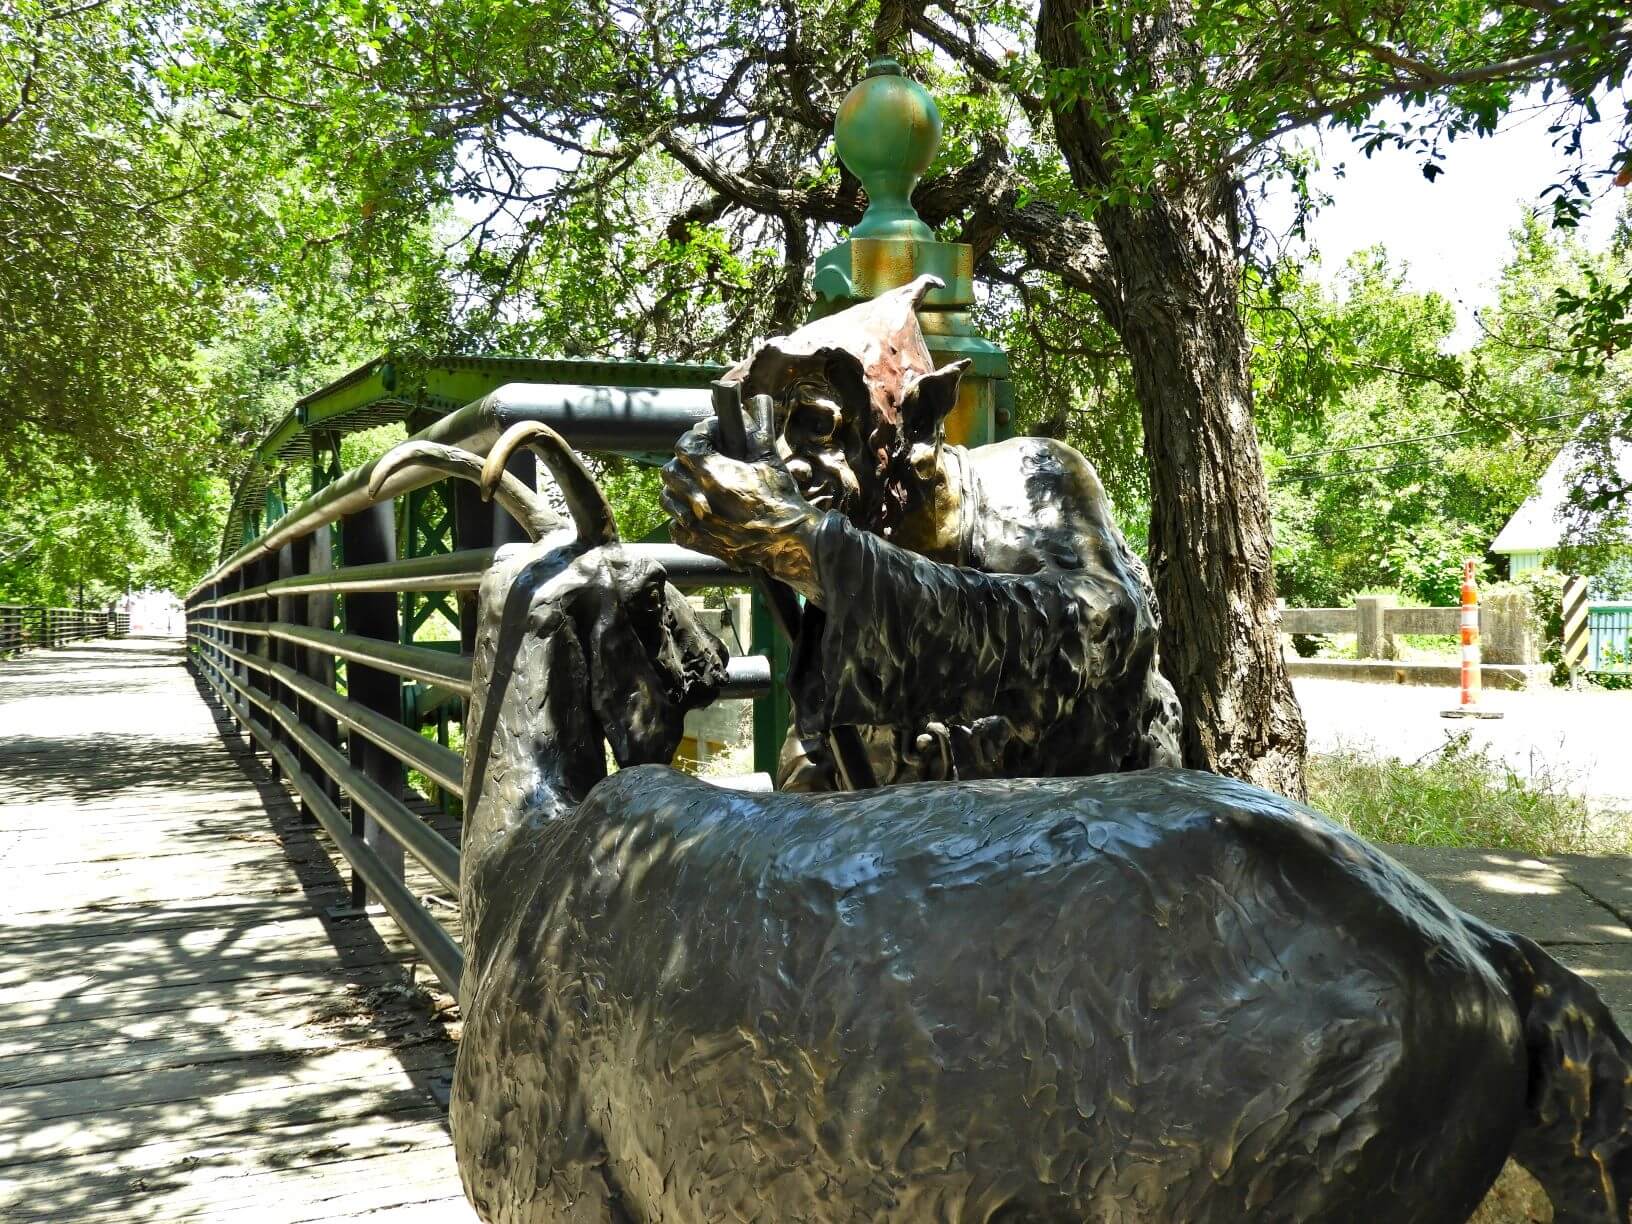 Salado: The troll at the bridge and the billy goat statue